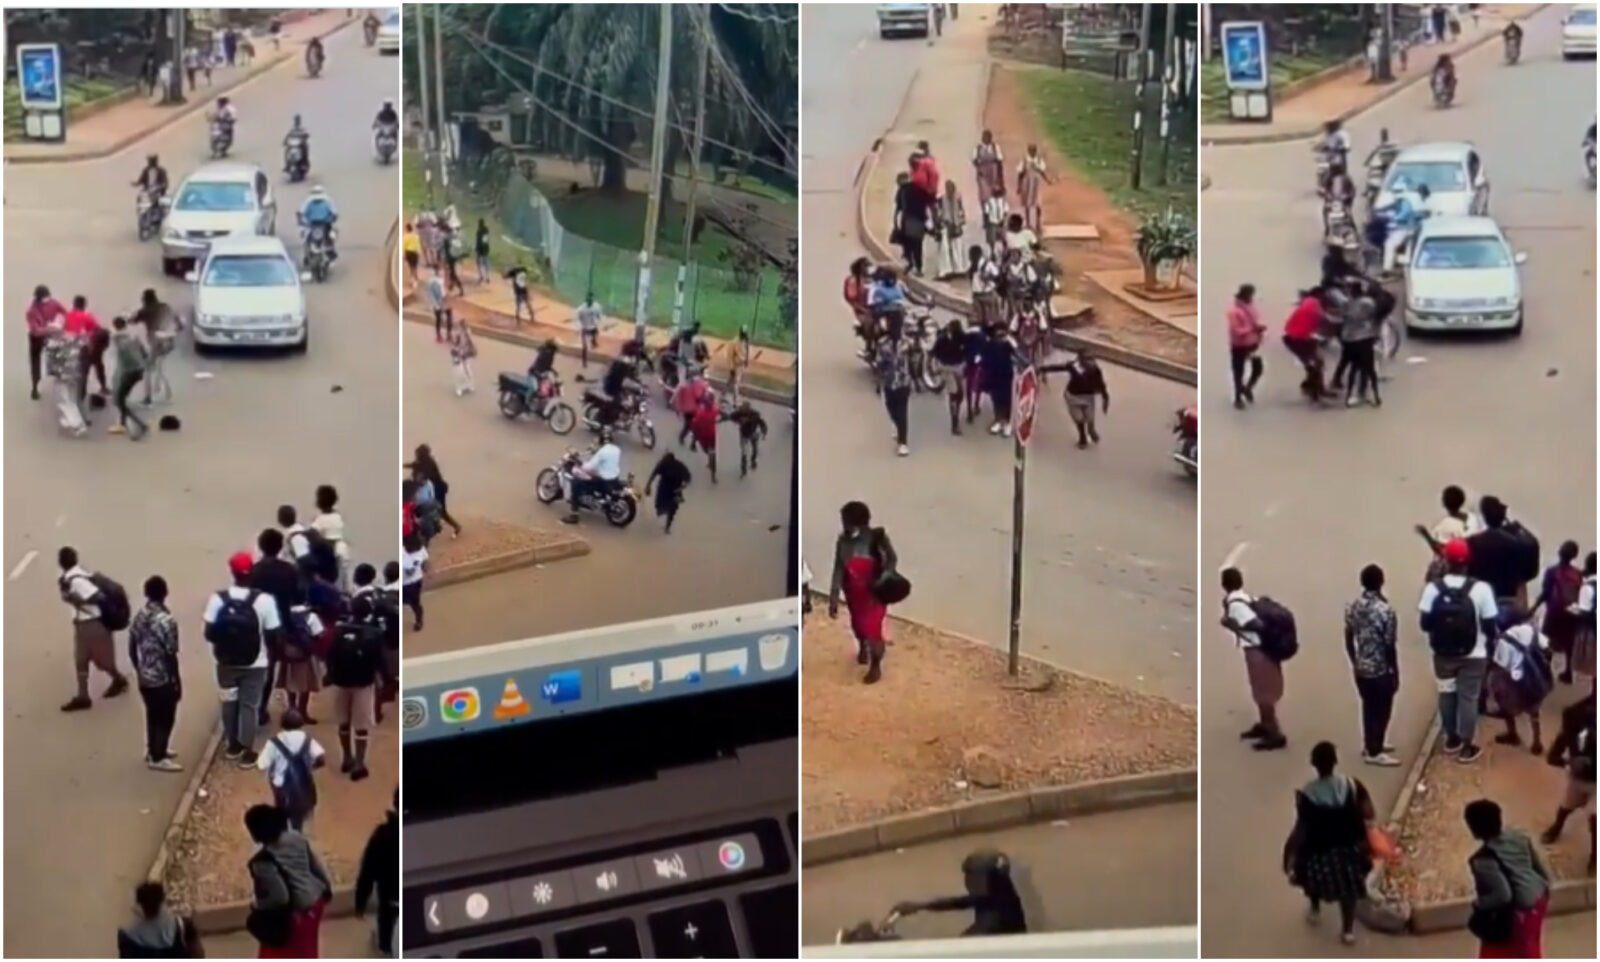 When daring gang targeted an engineer carrying KSh1 million in broad daylight: Uganda police address CCTV footage